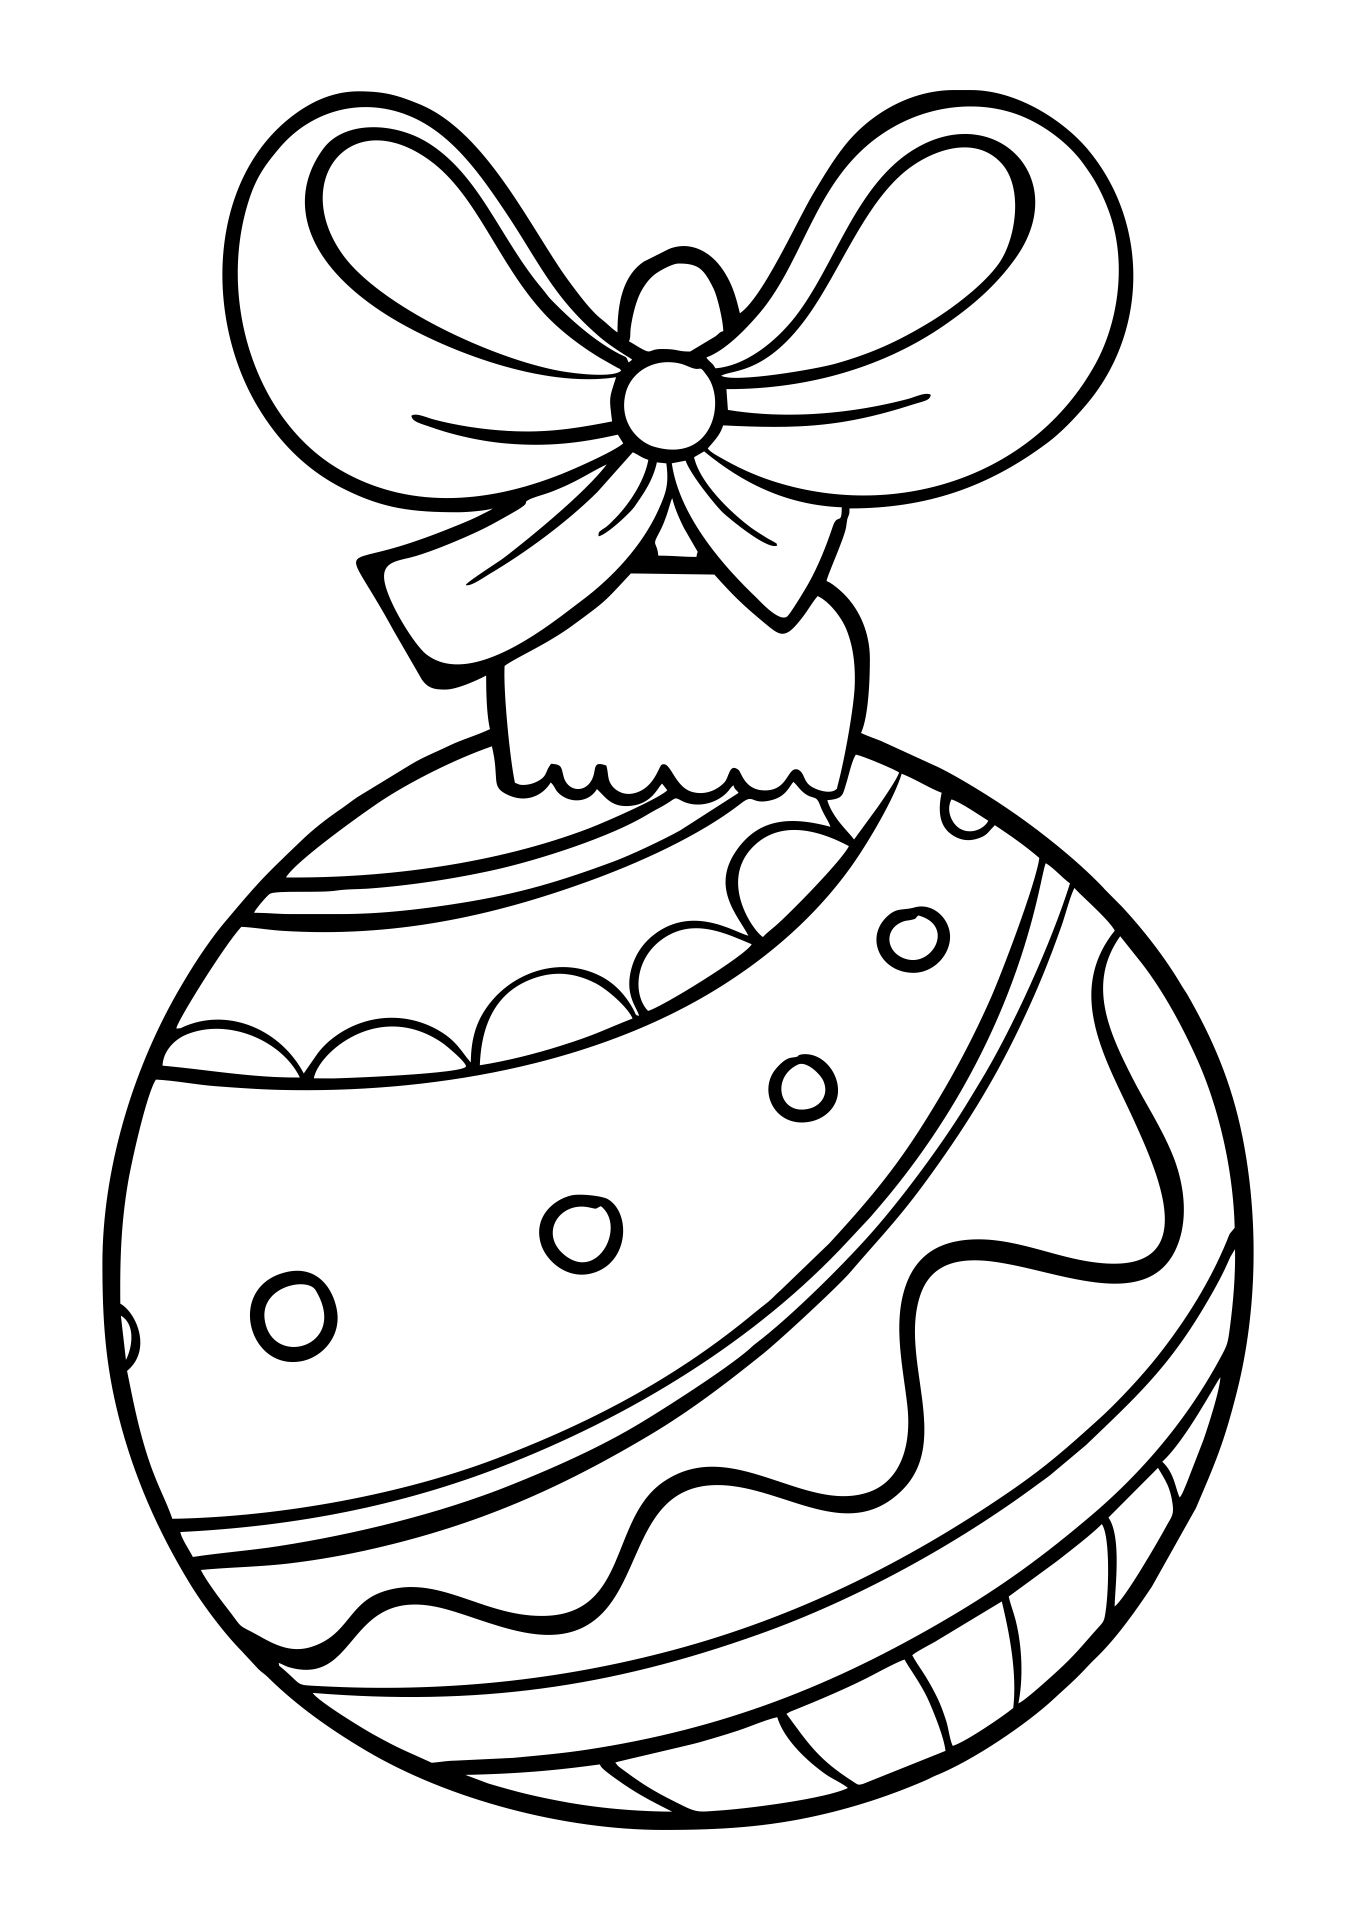 7 Best Images Of Free Christmas Printable Ornament Coloring Pages Free Printable Christmas 